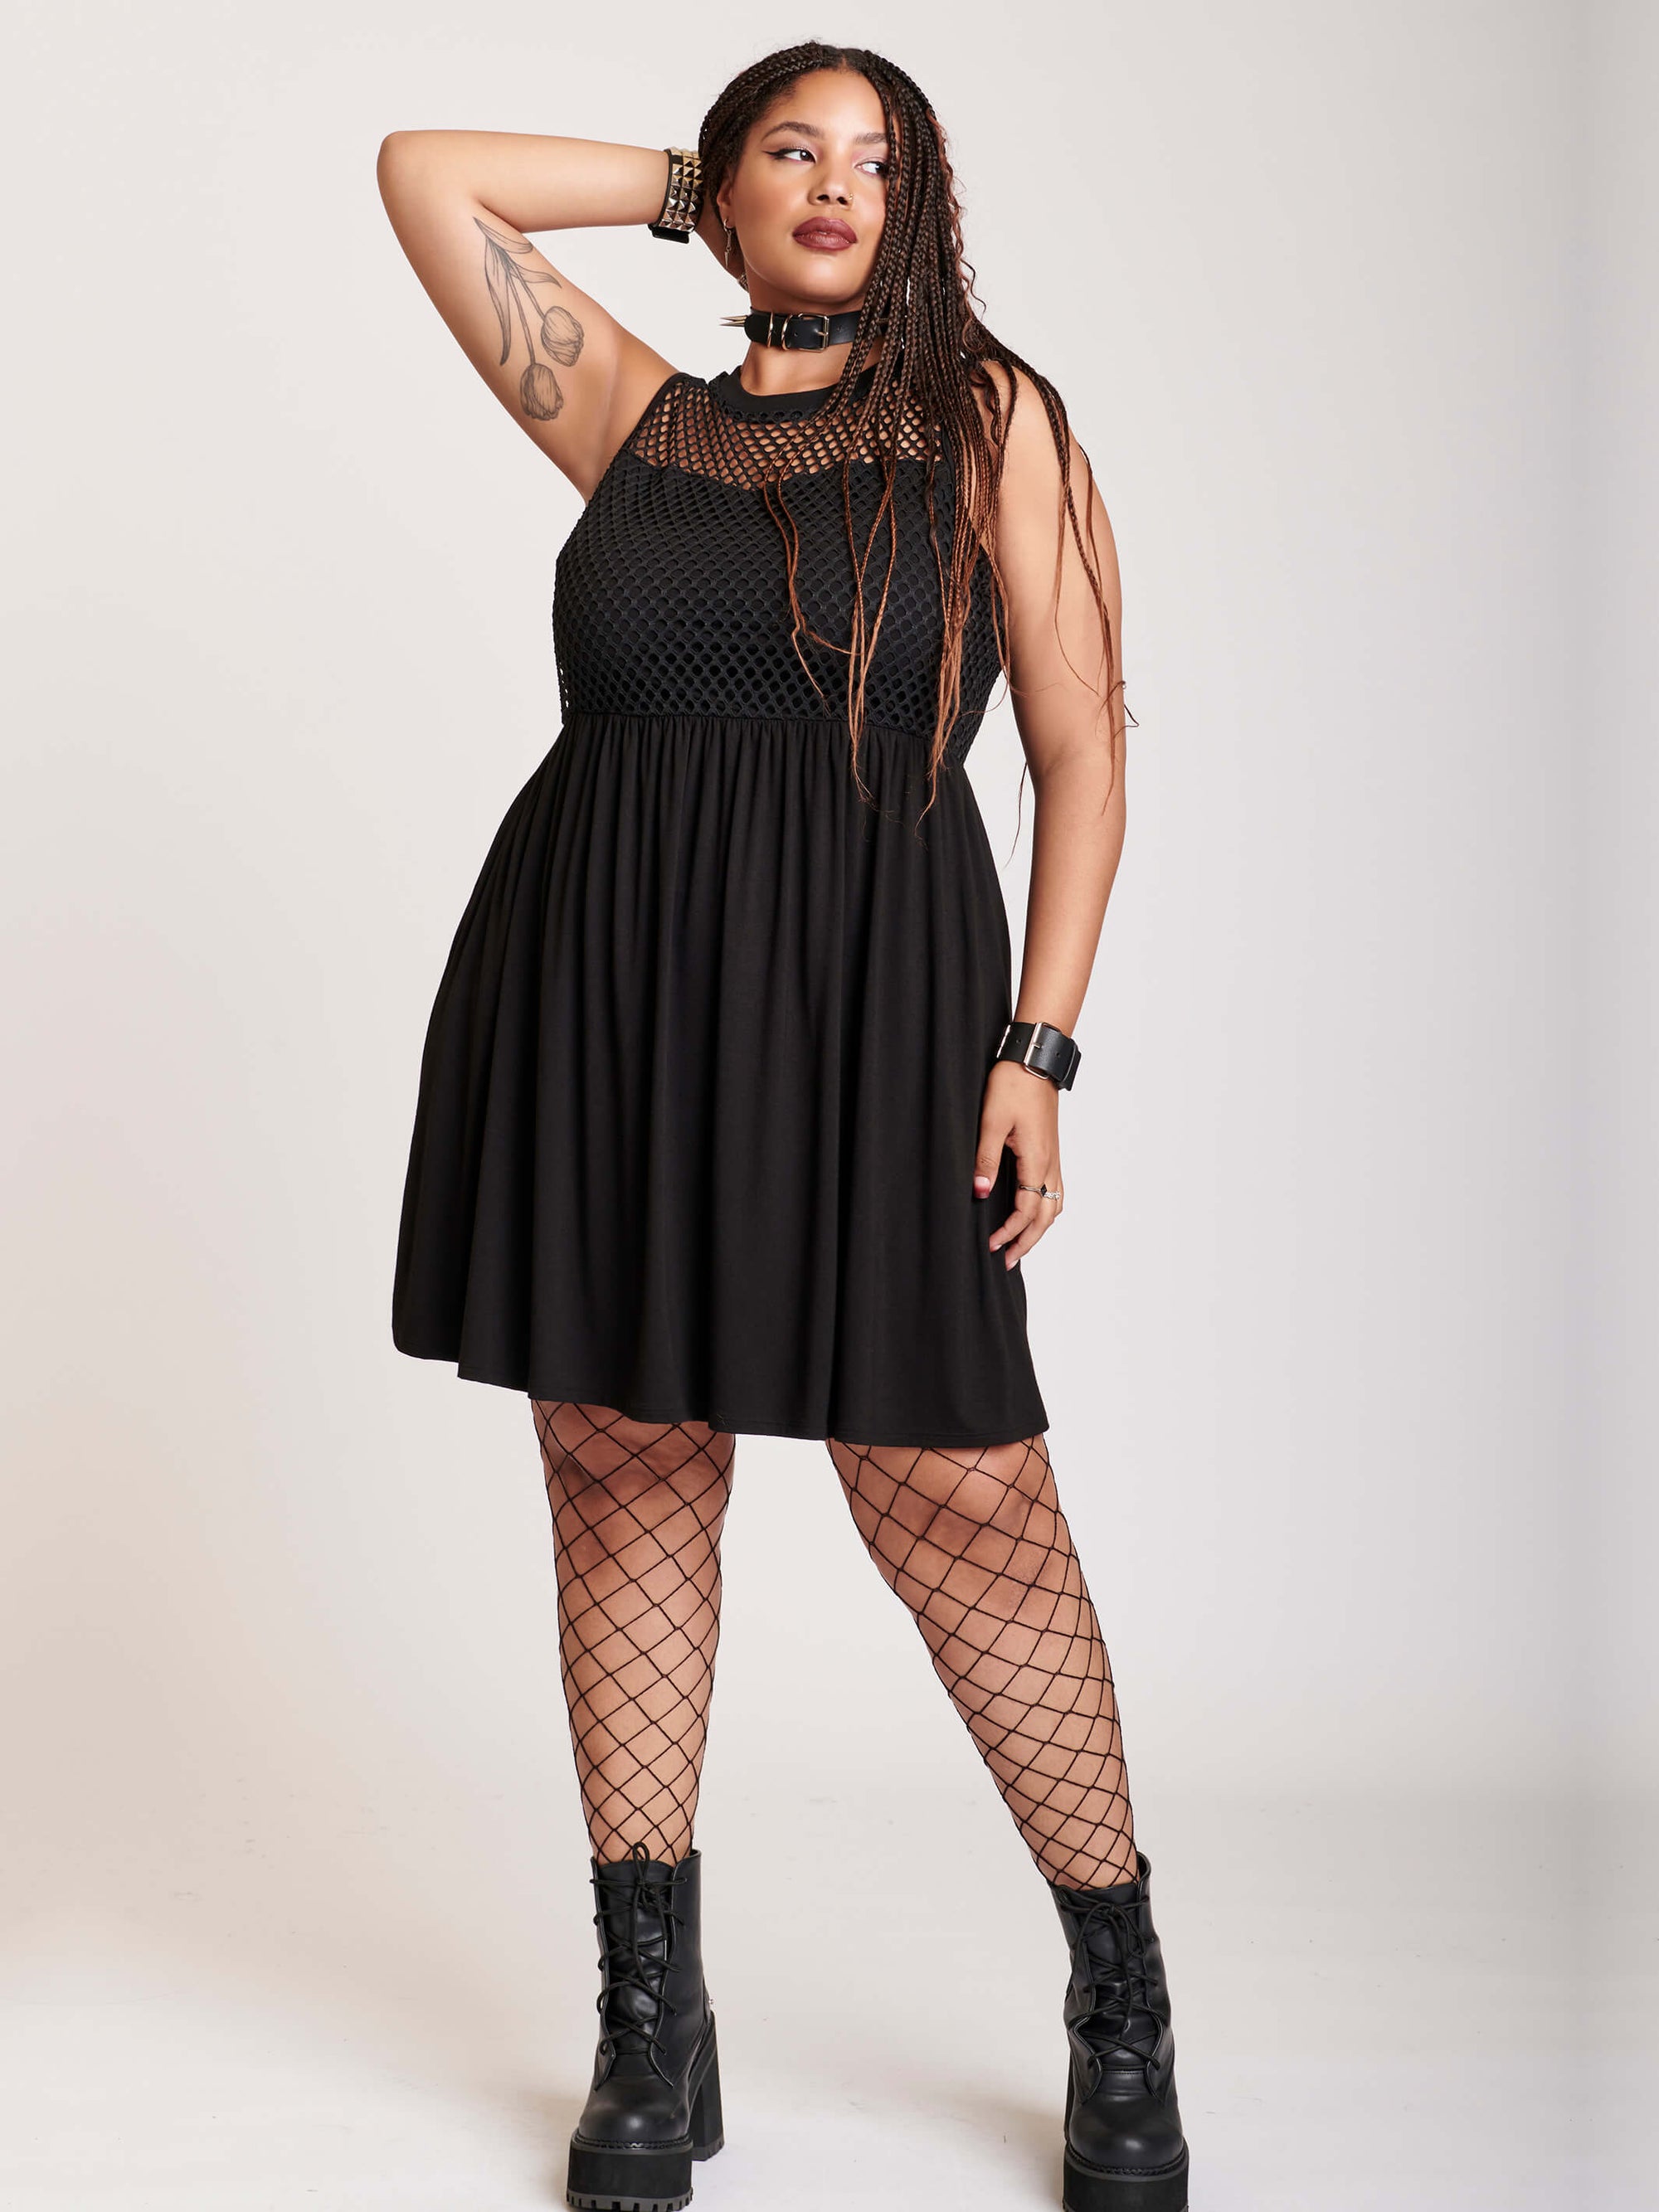 Goth looks for your Sunday! : r/PlusSize